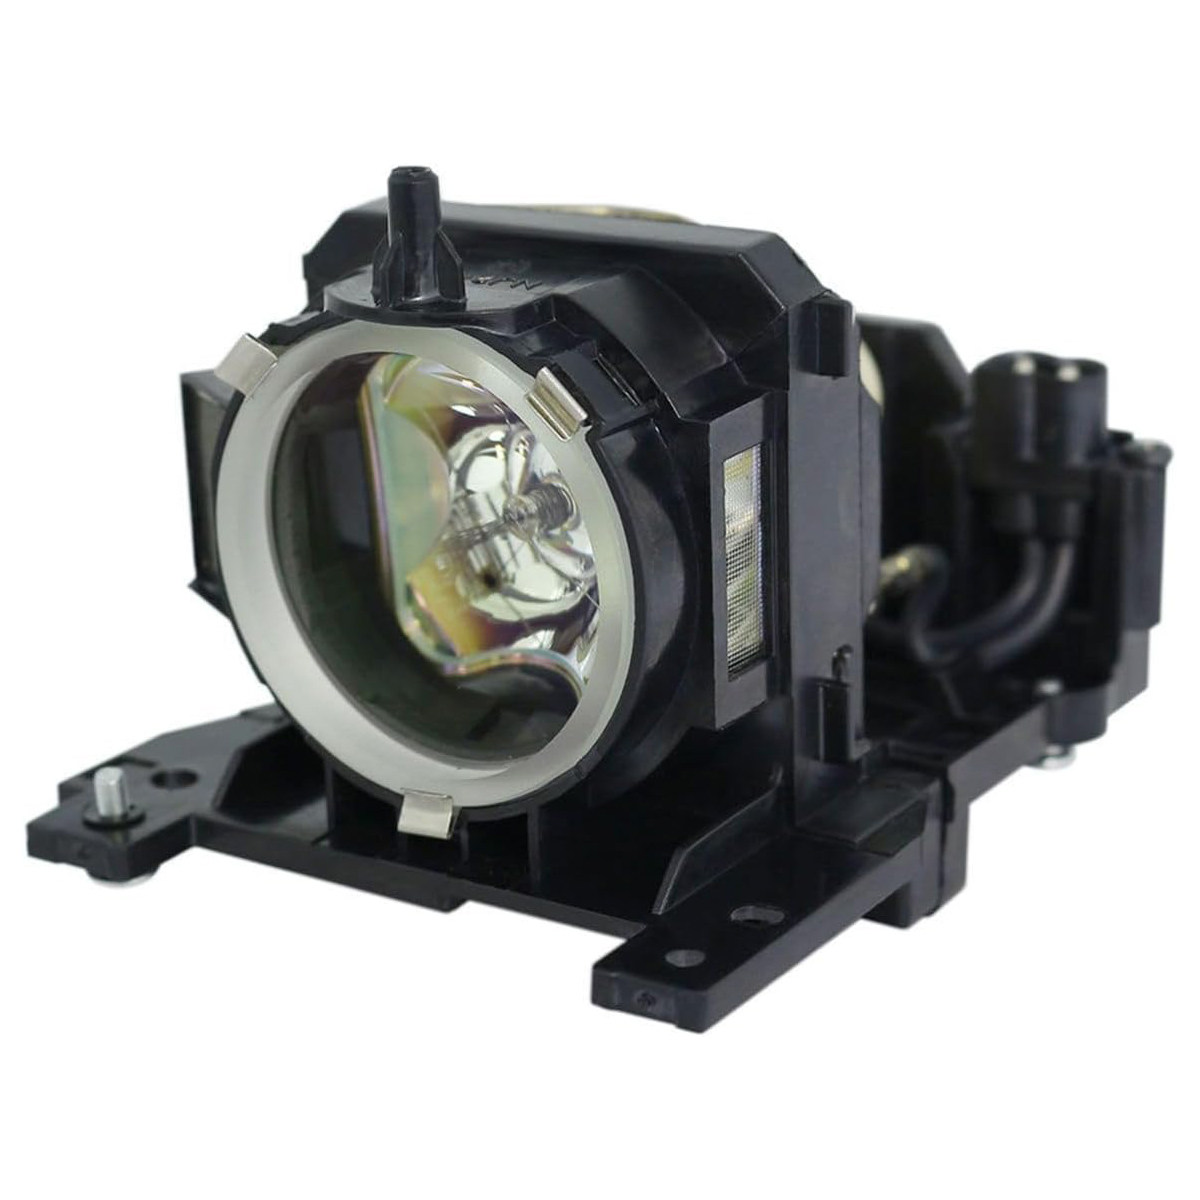 Replacement Projector lamp 78-6969-9947-9 For 3M WX66 X76